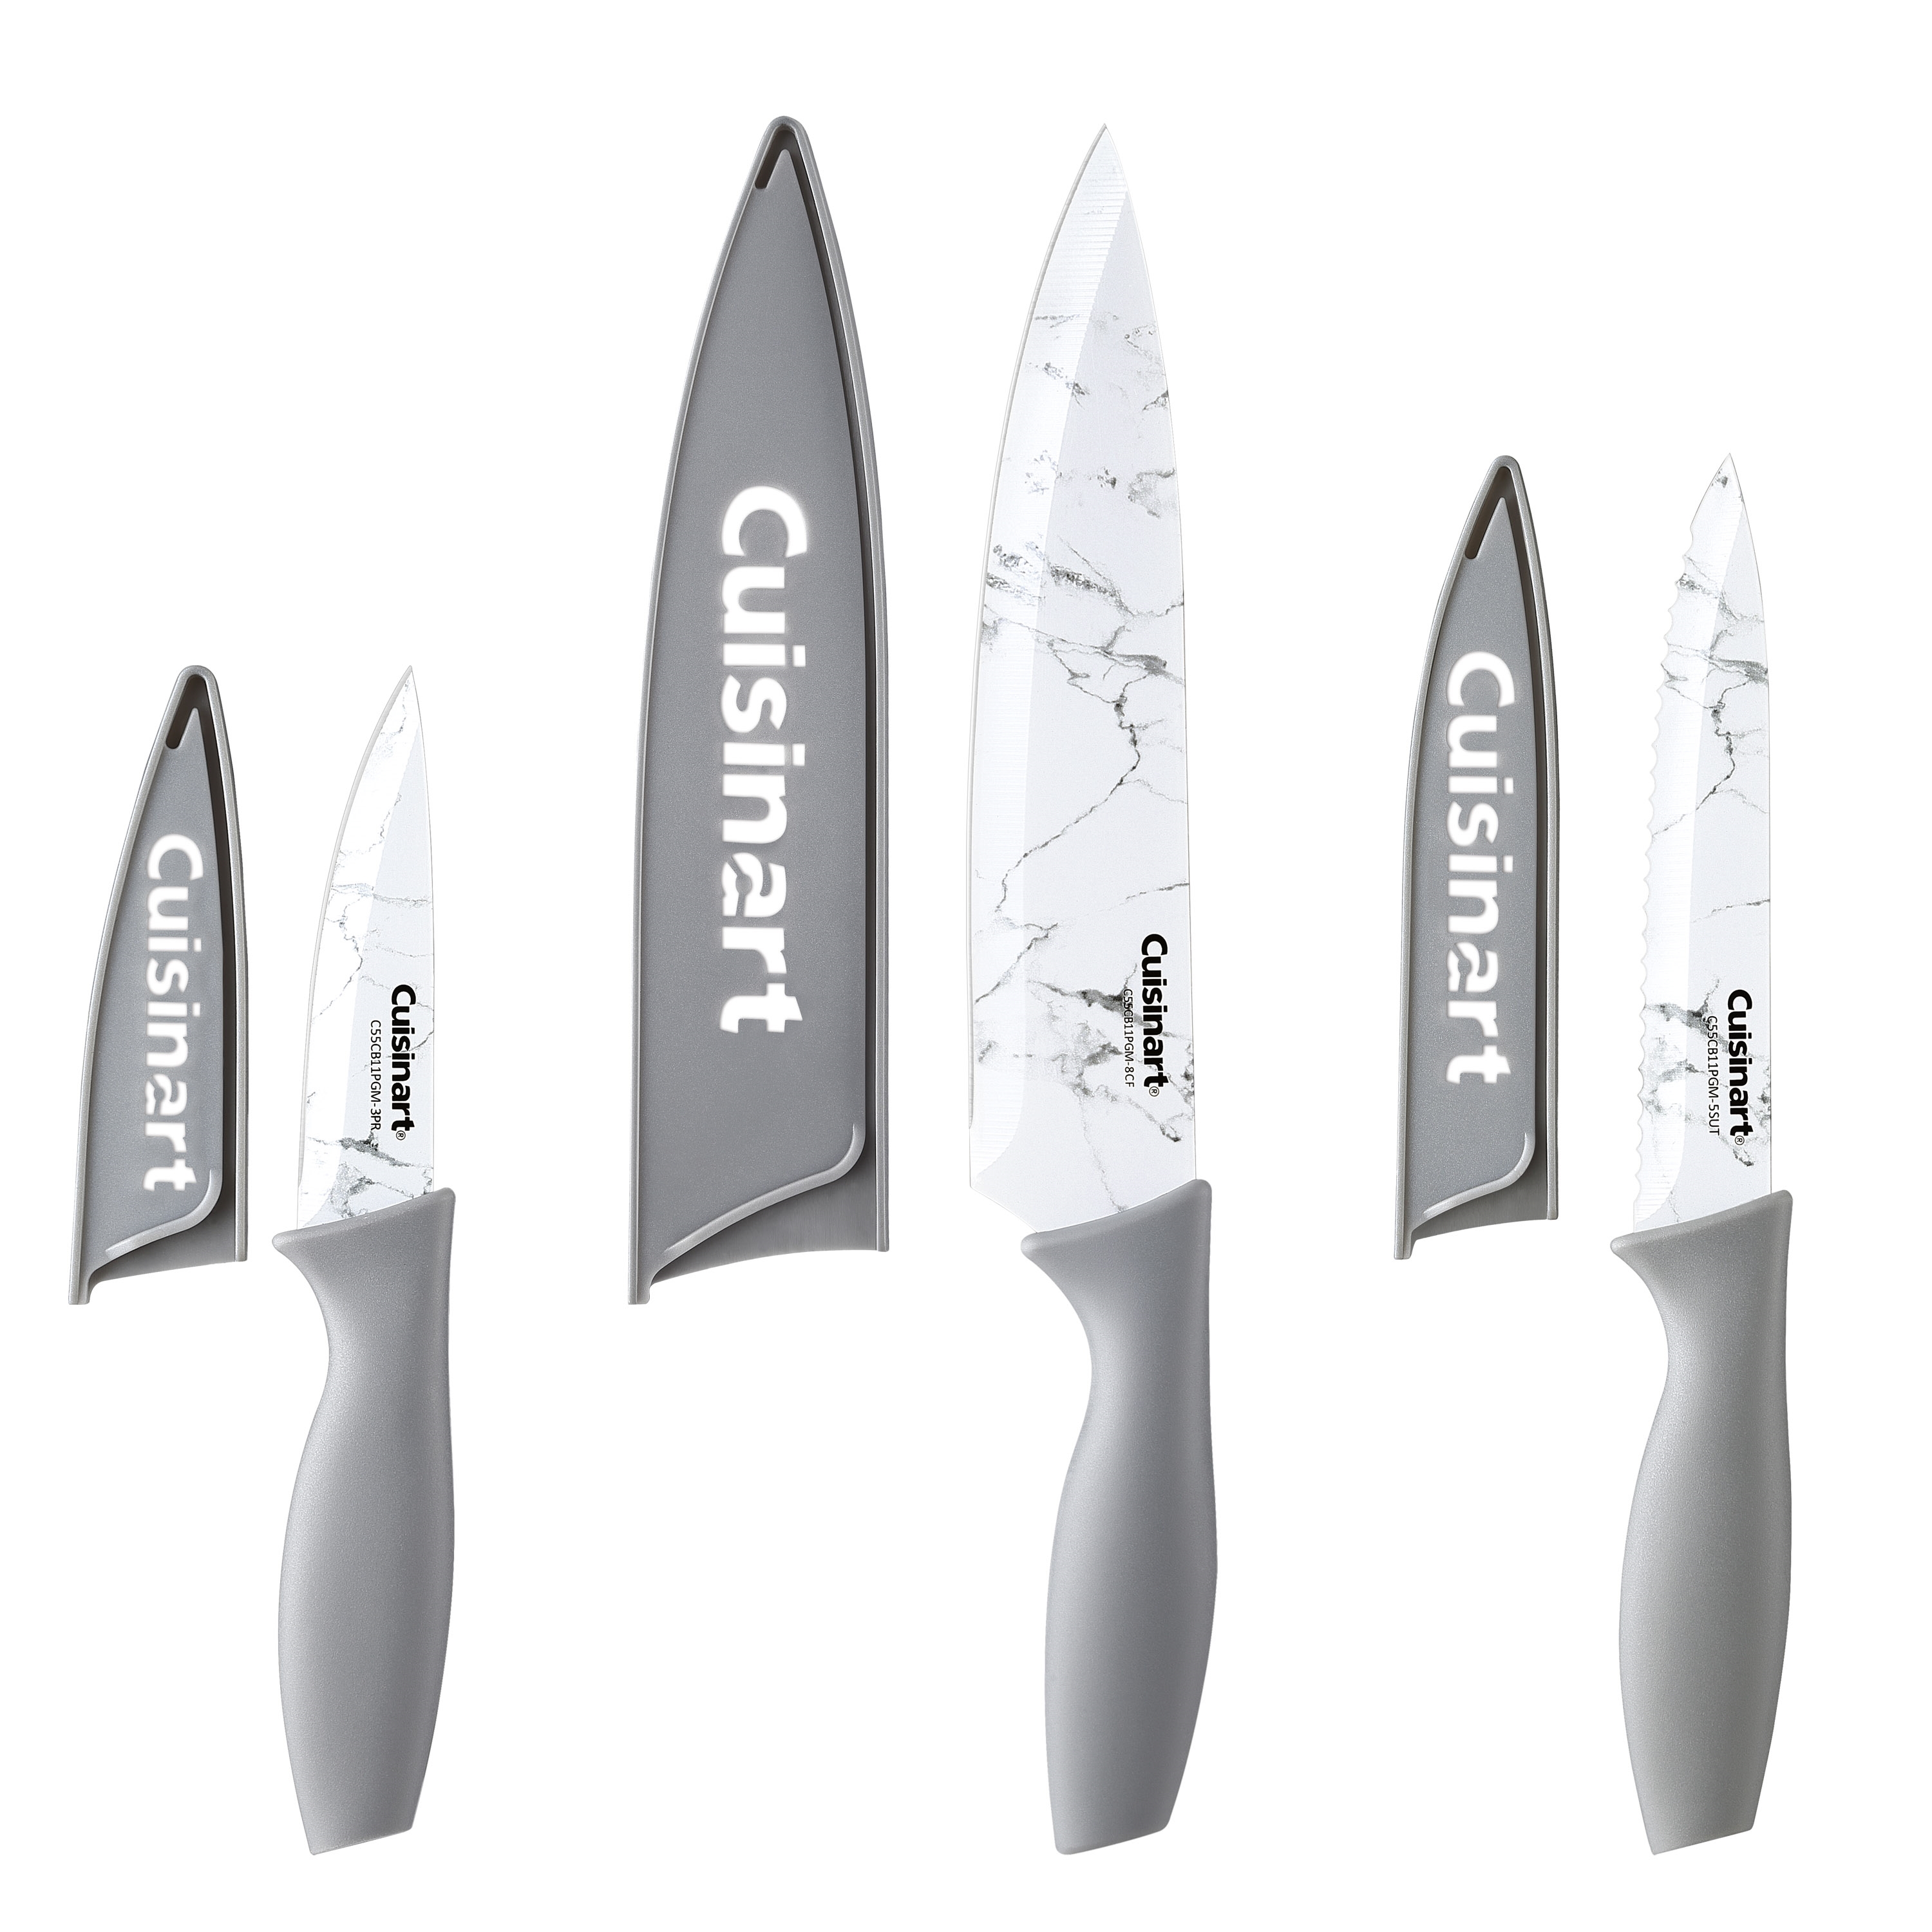 Discontinued Cuisinart Advantage 6pc Printed Chef Set - Grey Marble